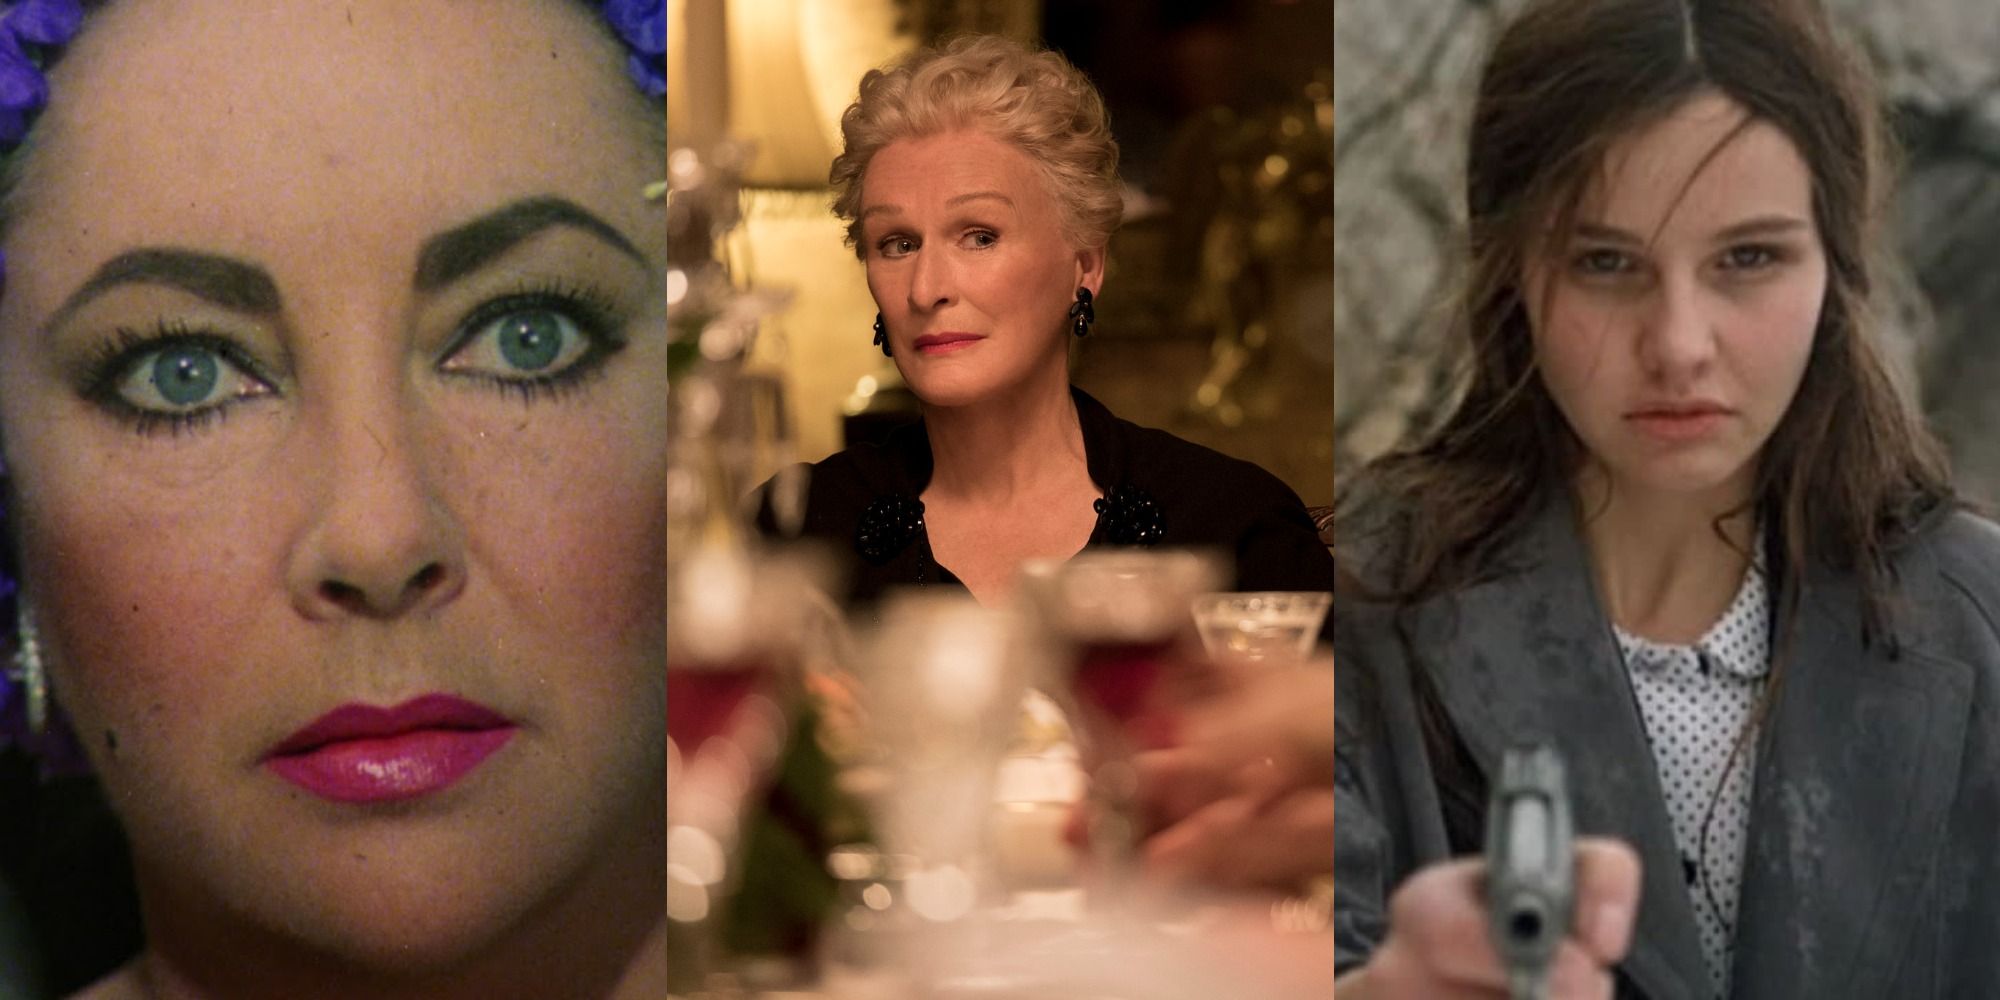 10 Agatha Christie Film Adaptations to Watch Ahead of 'Death on the Nile'